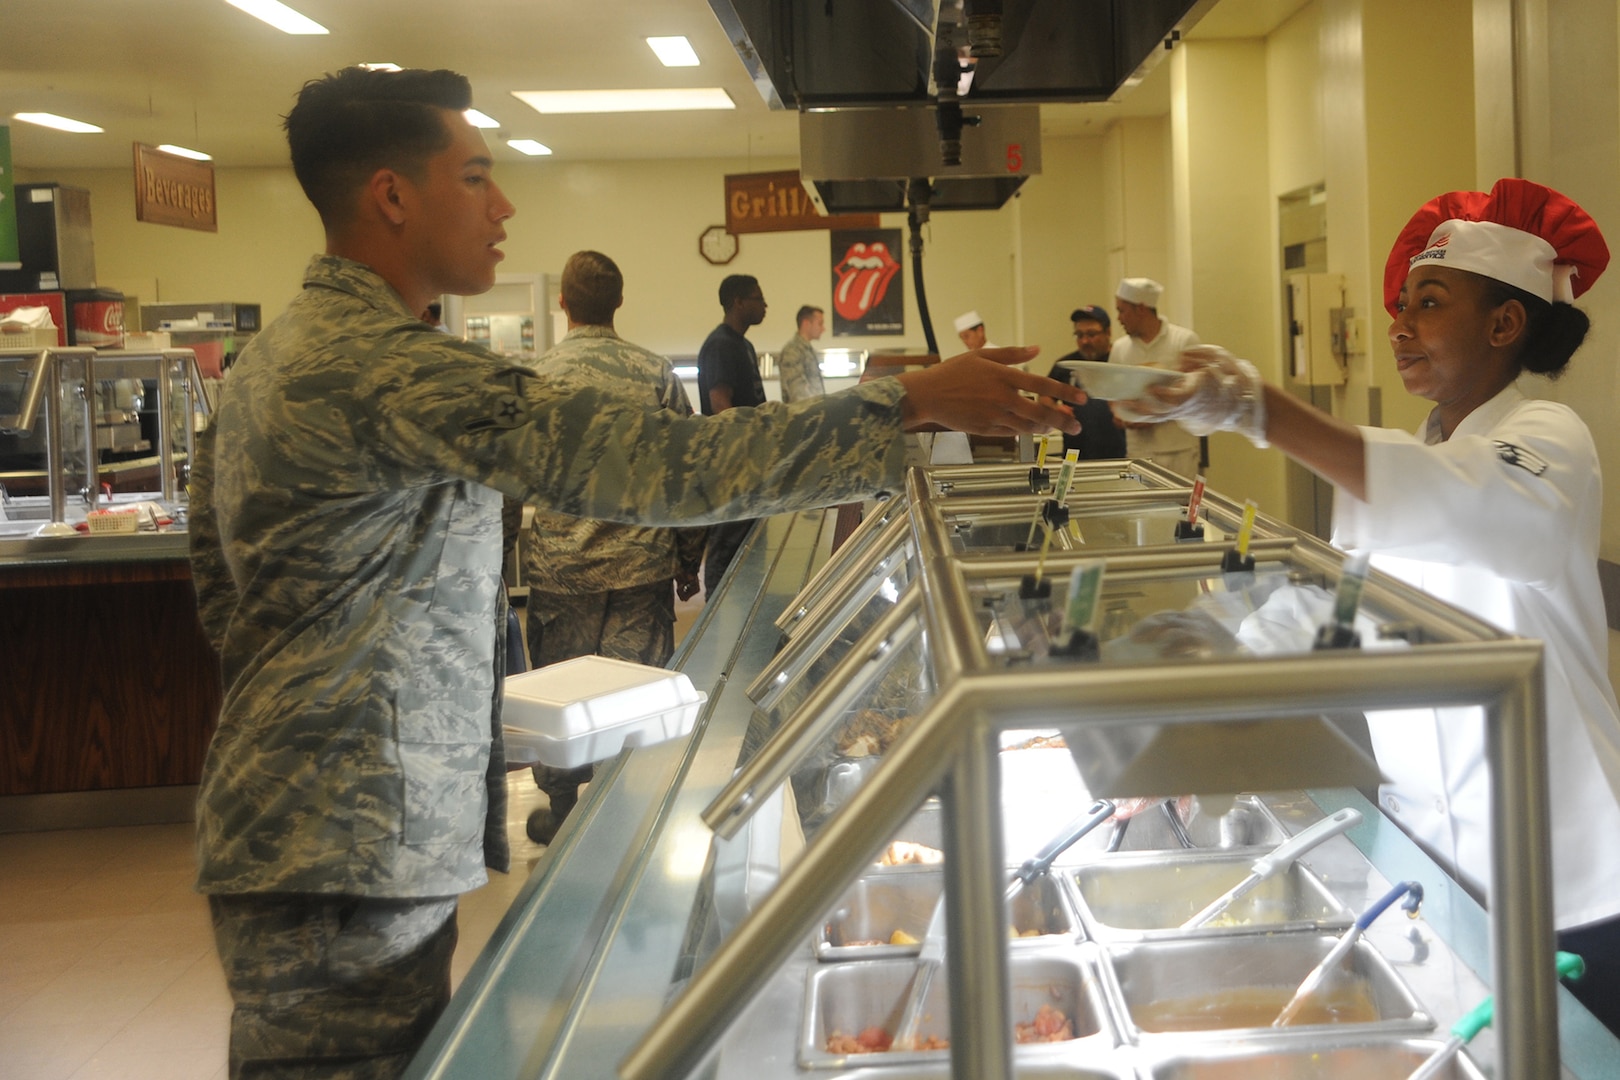 An airman receives a dish of food from a server.